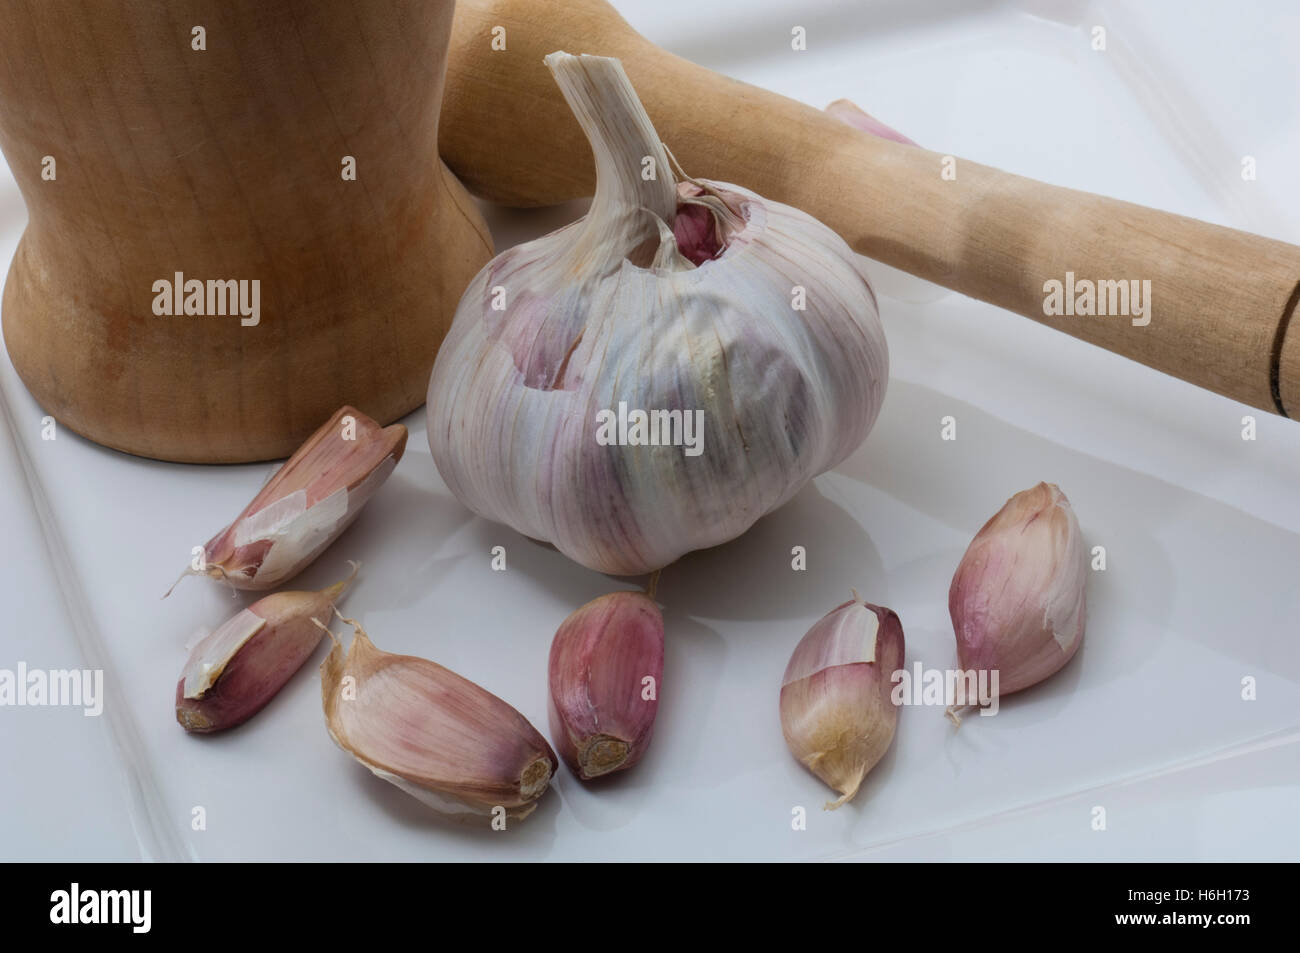 Garlic with mortar and pestle Stock Photo